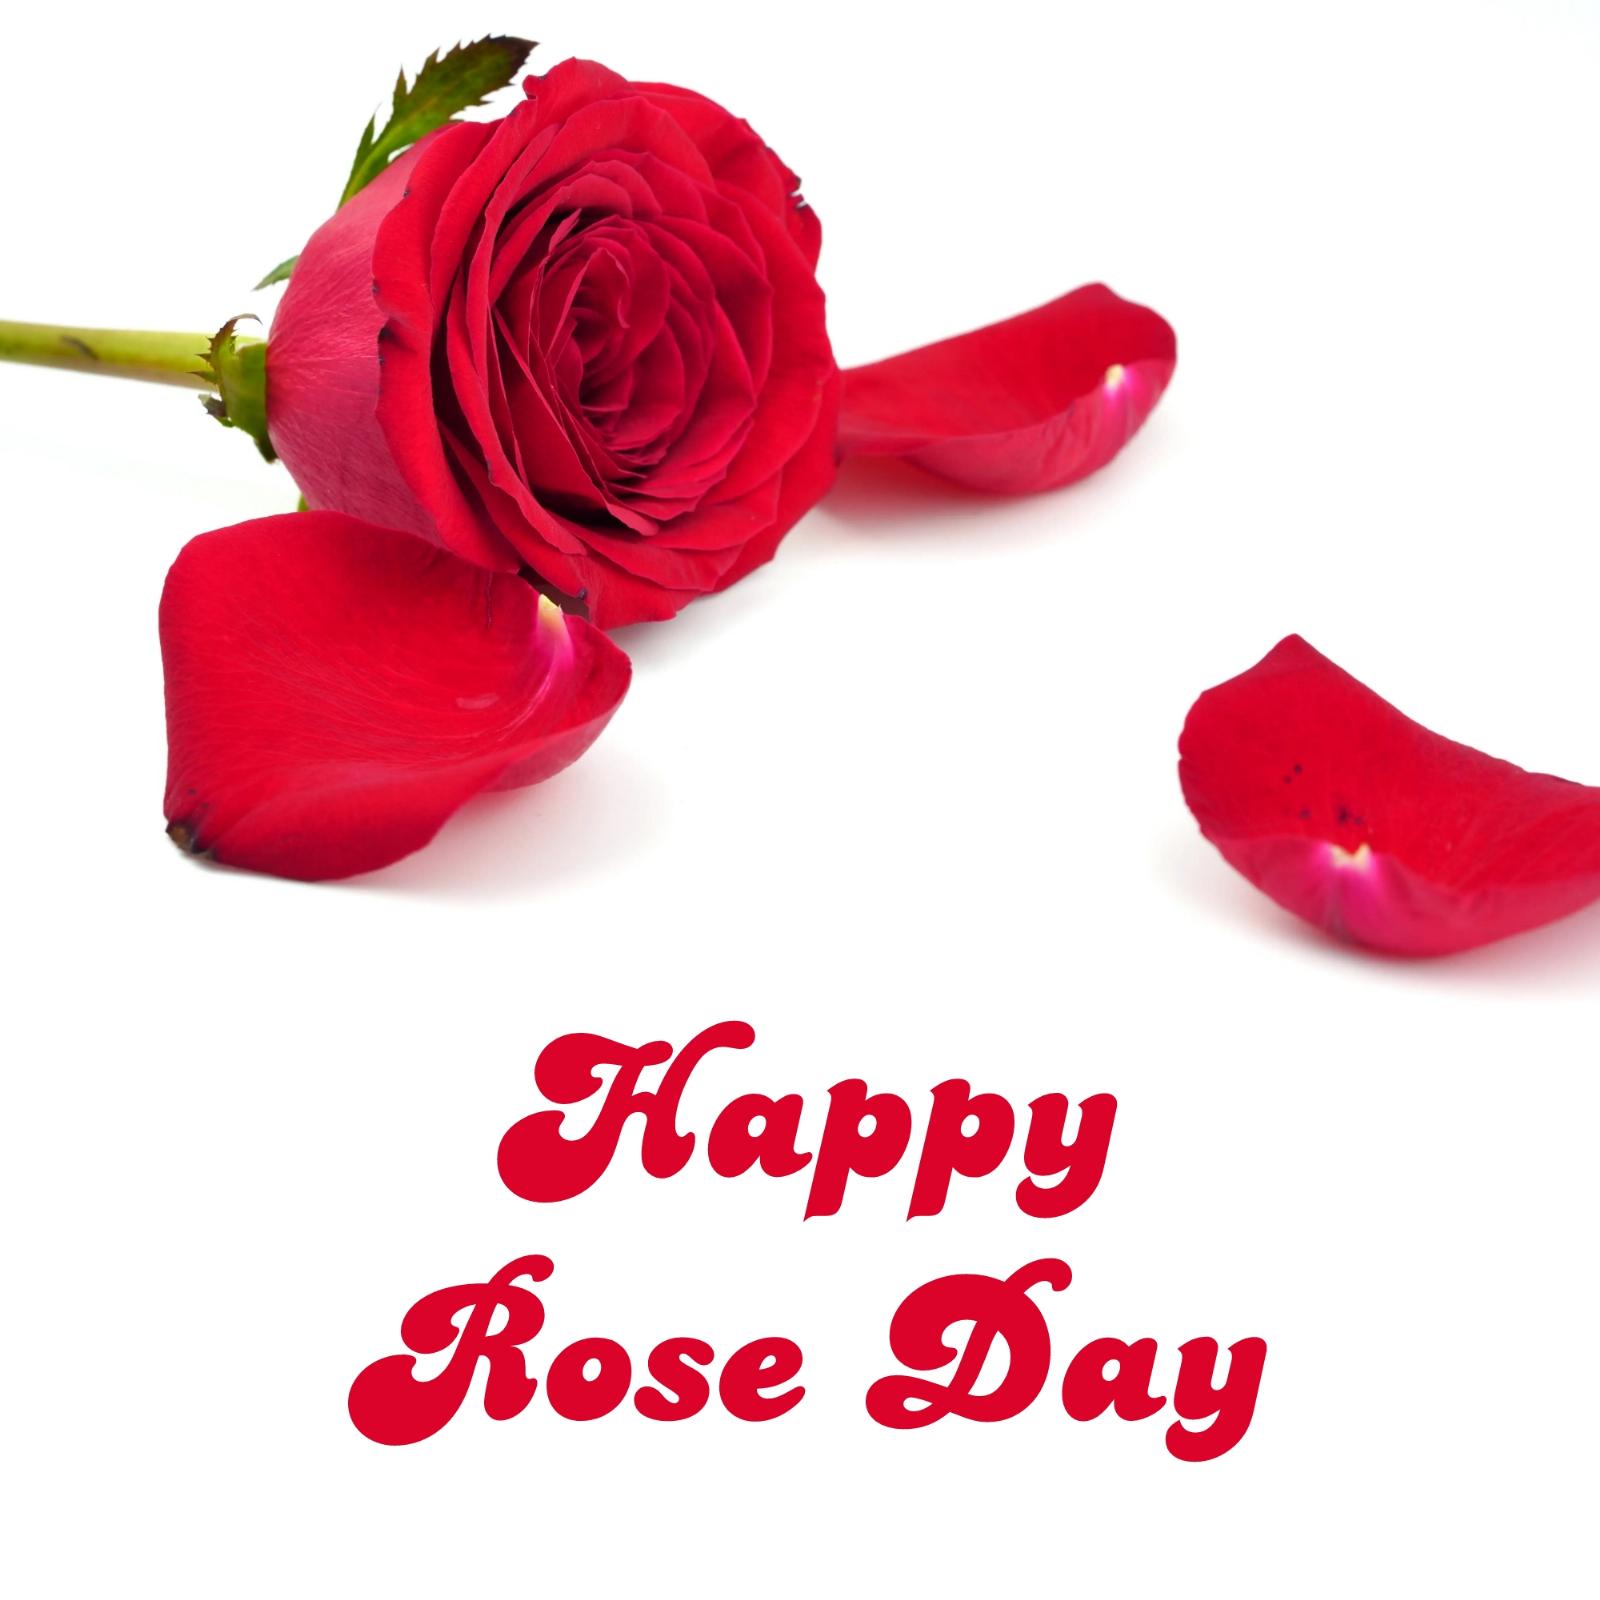 Happy Rose Day Image HD